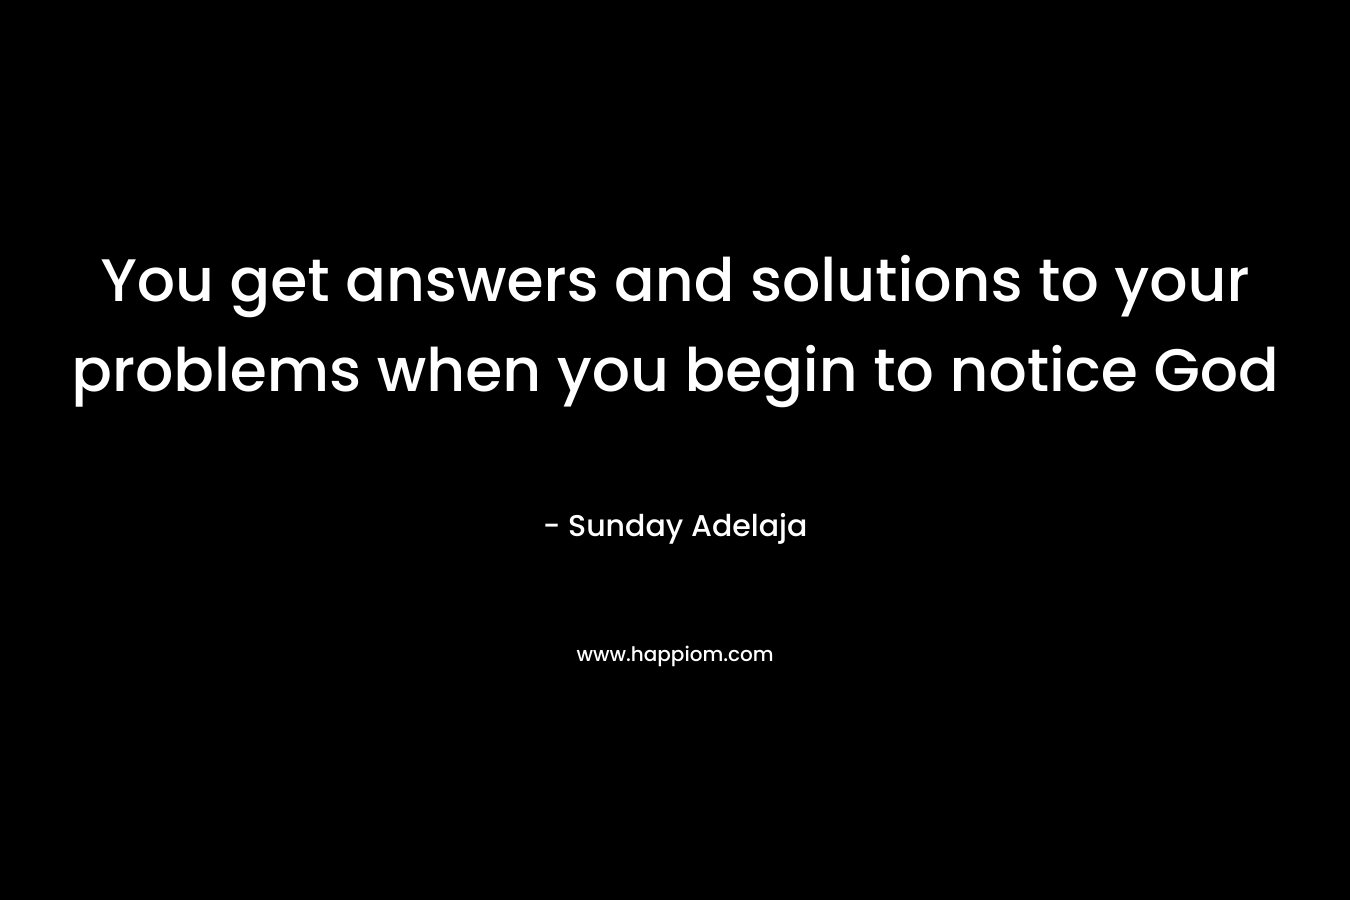 You get answers and solutions to your problems when you begin to notice God